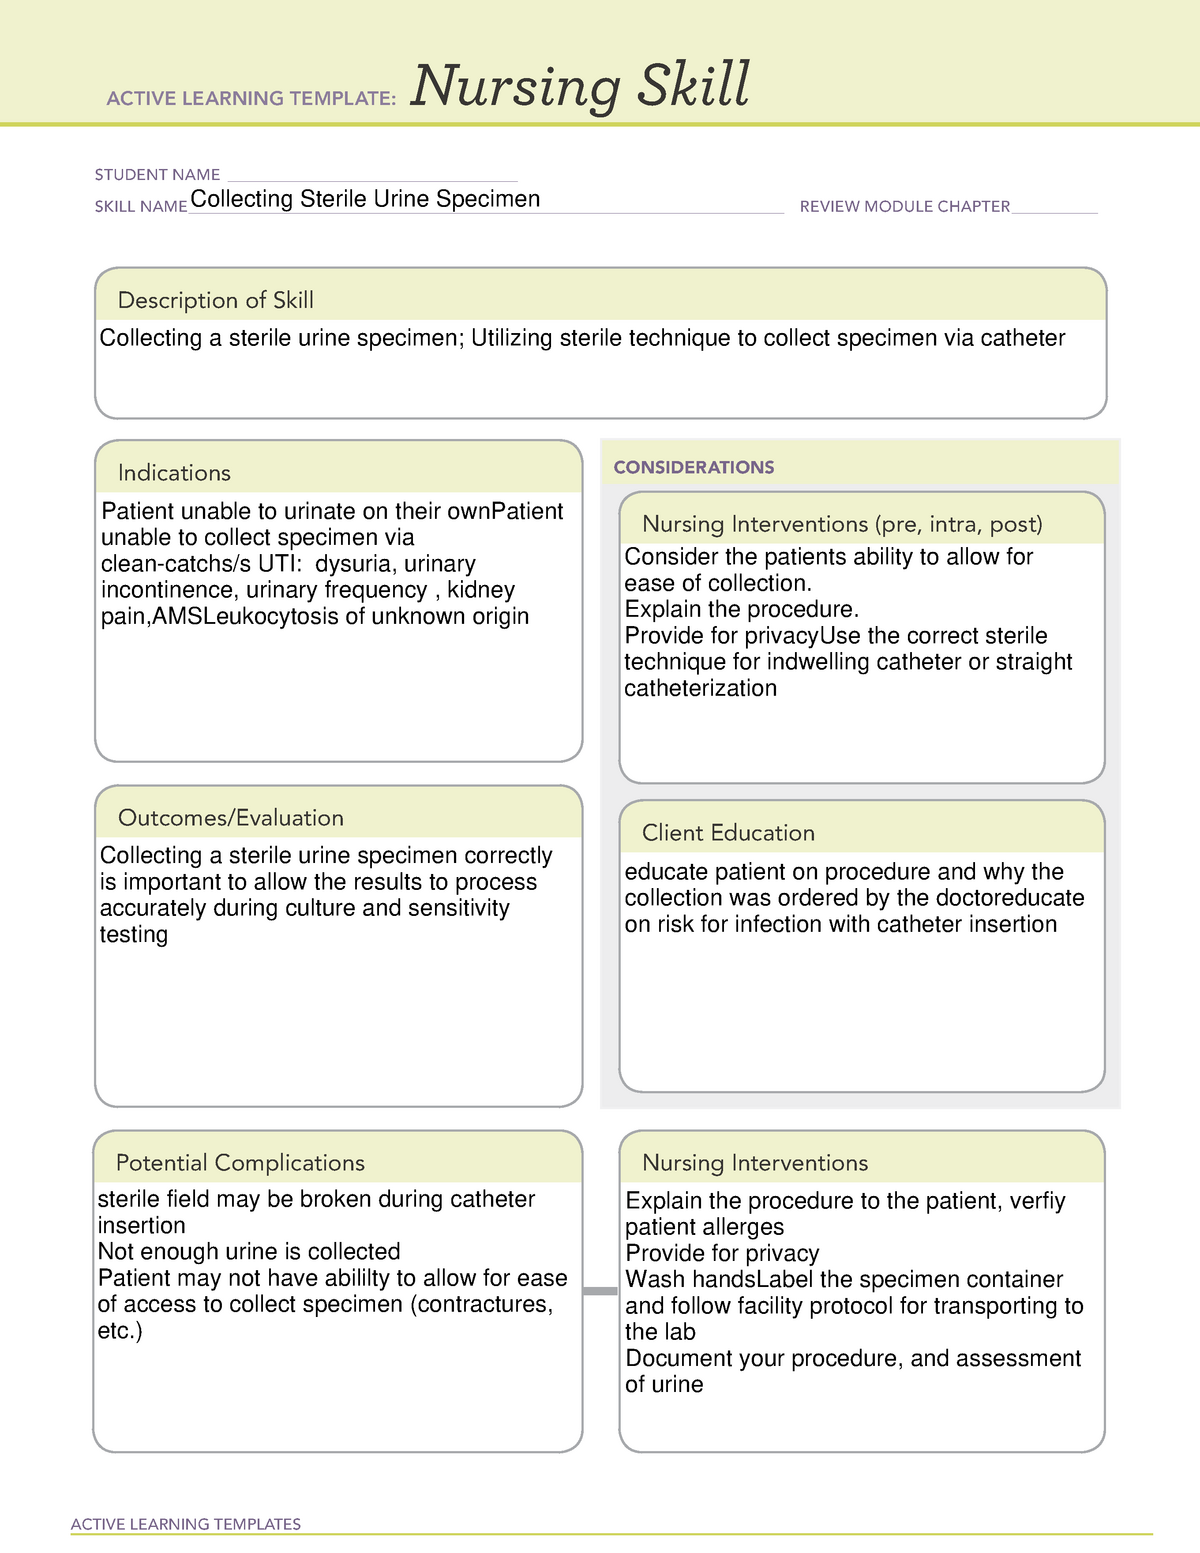 nursing-skill-sterile-urine-collect-uti-active-learning-templates